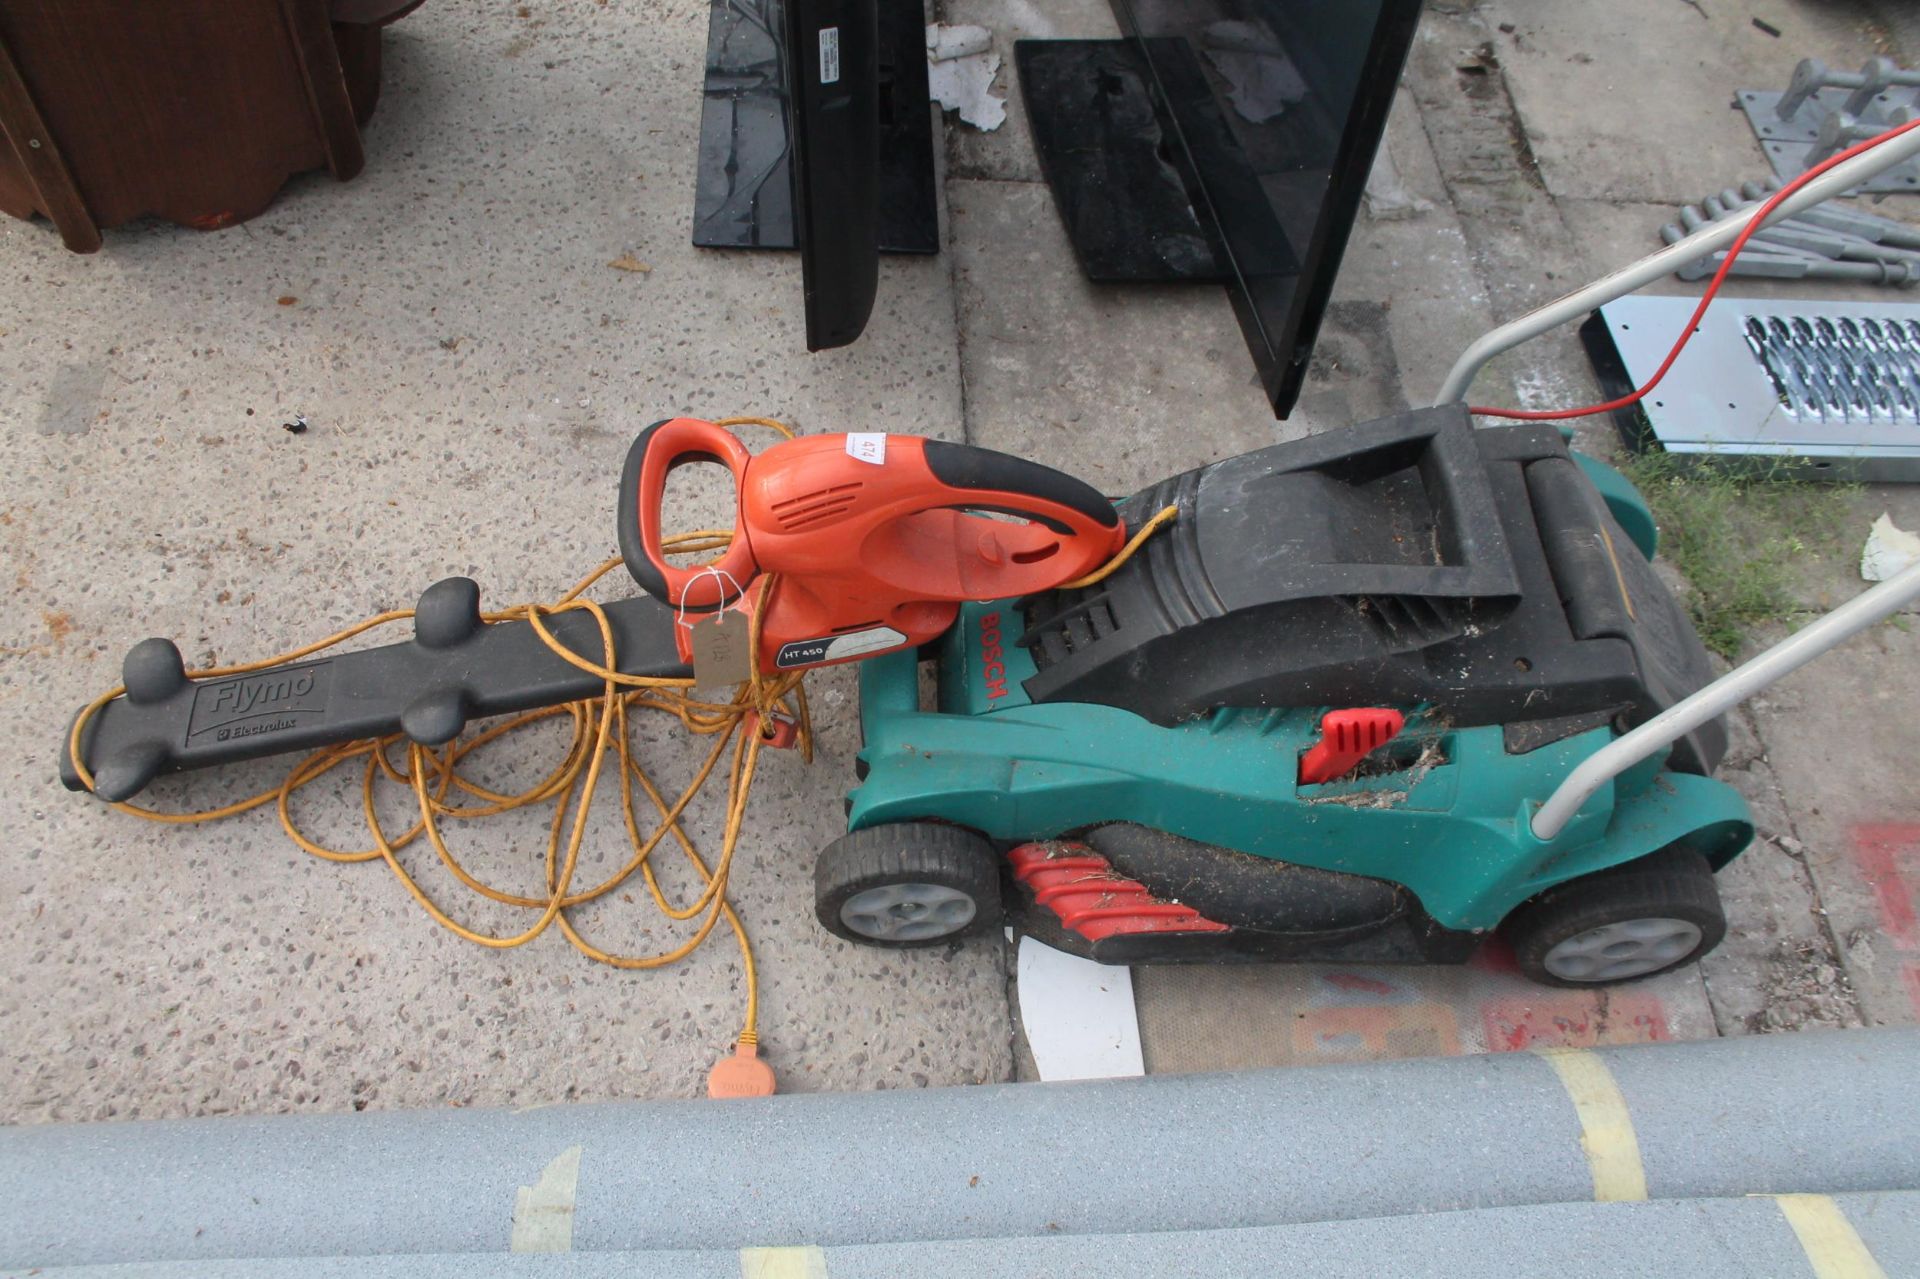 BOSCH ROTAX 40 GC LAWN MOWER AND FLYMO HT 450 HEDGE TRIMMER NO VAT - Image 2 of 2